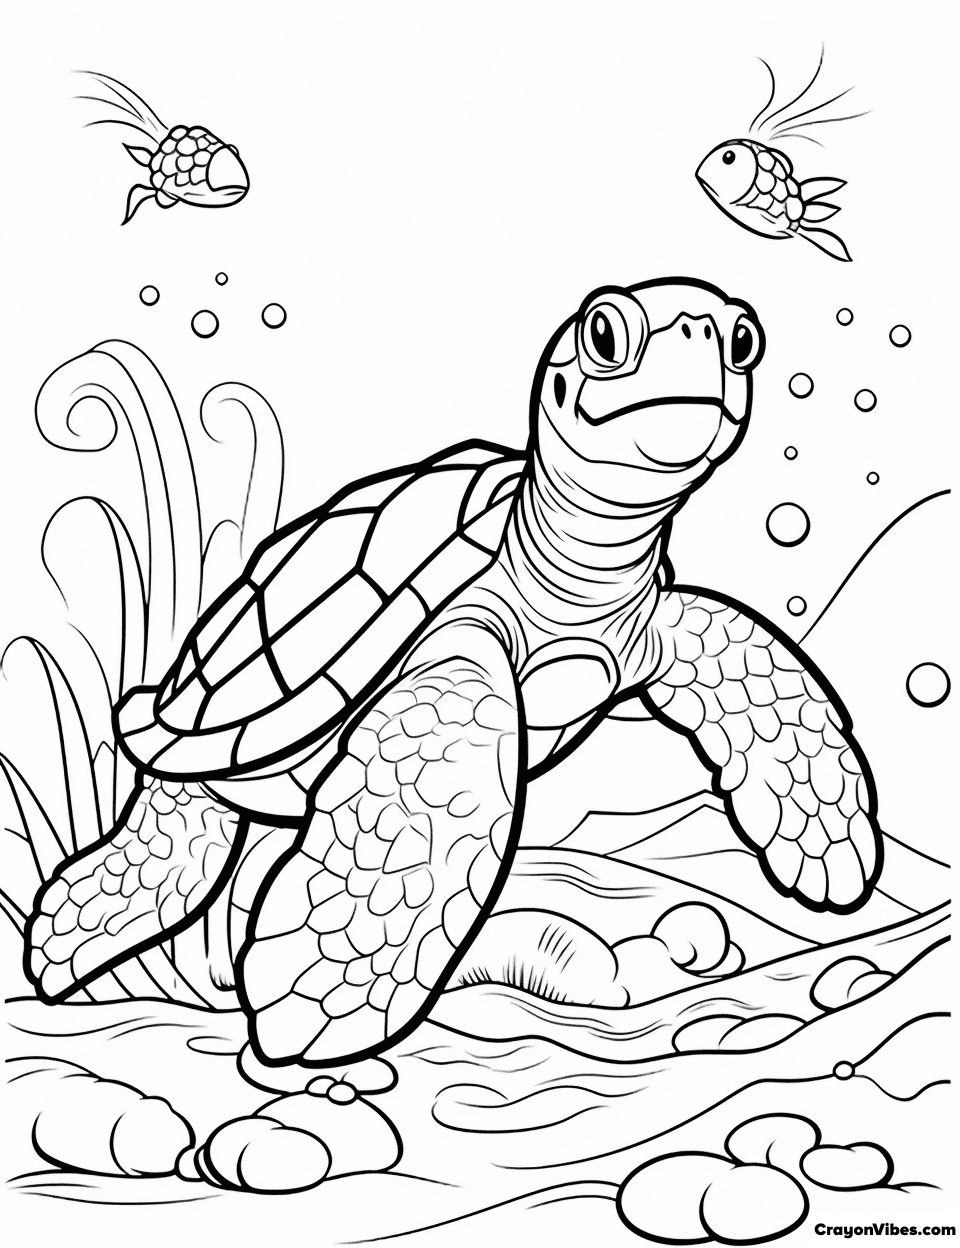 Tortoise Coloring Pages Free Printable for Kids and Adults